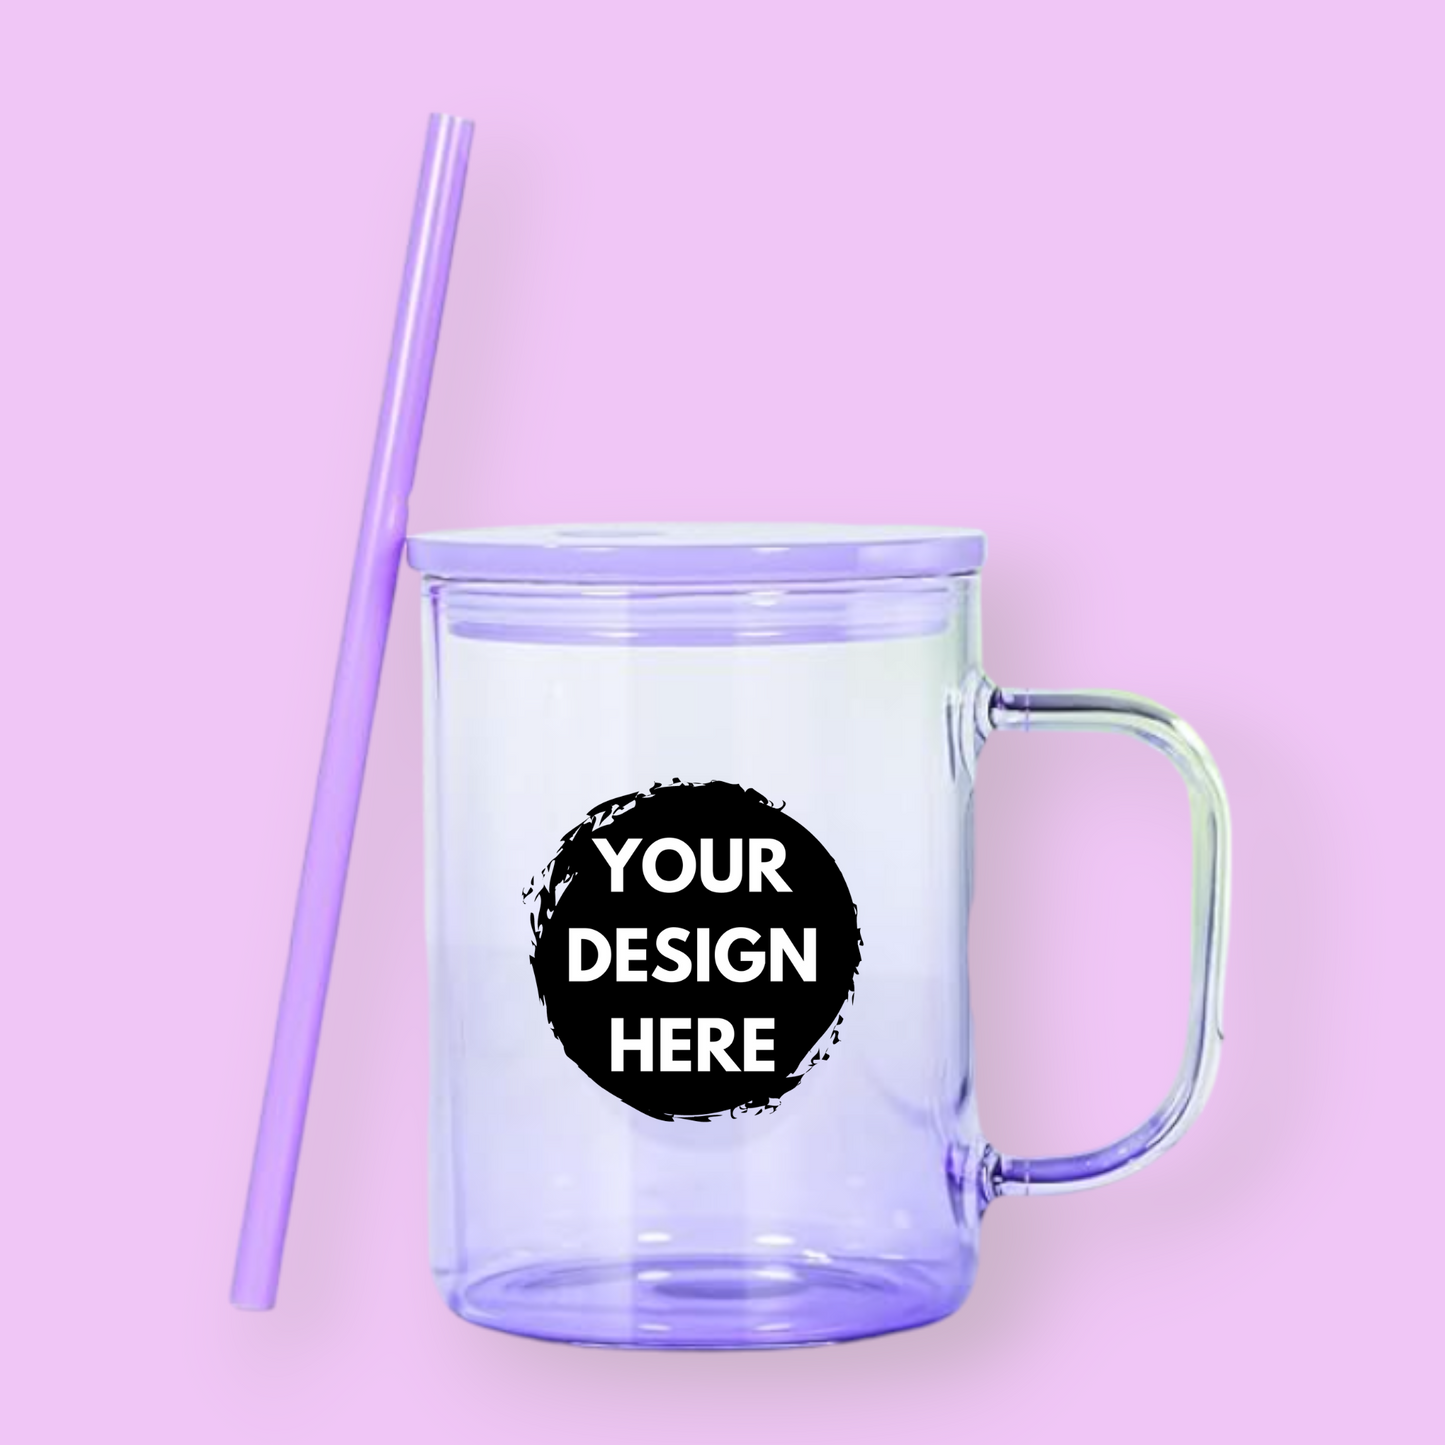 Create Your Own 16oz Glass Colored Mug w/ Lid & Straw